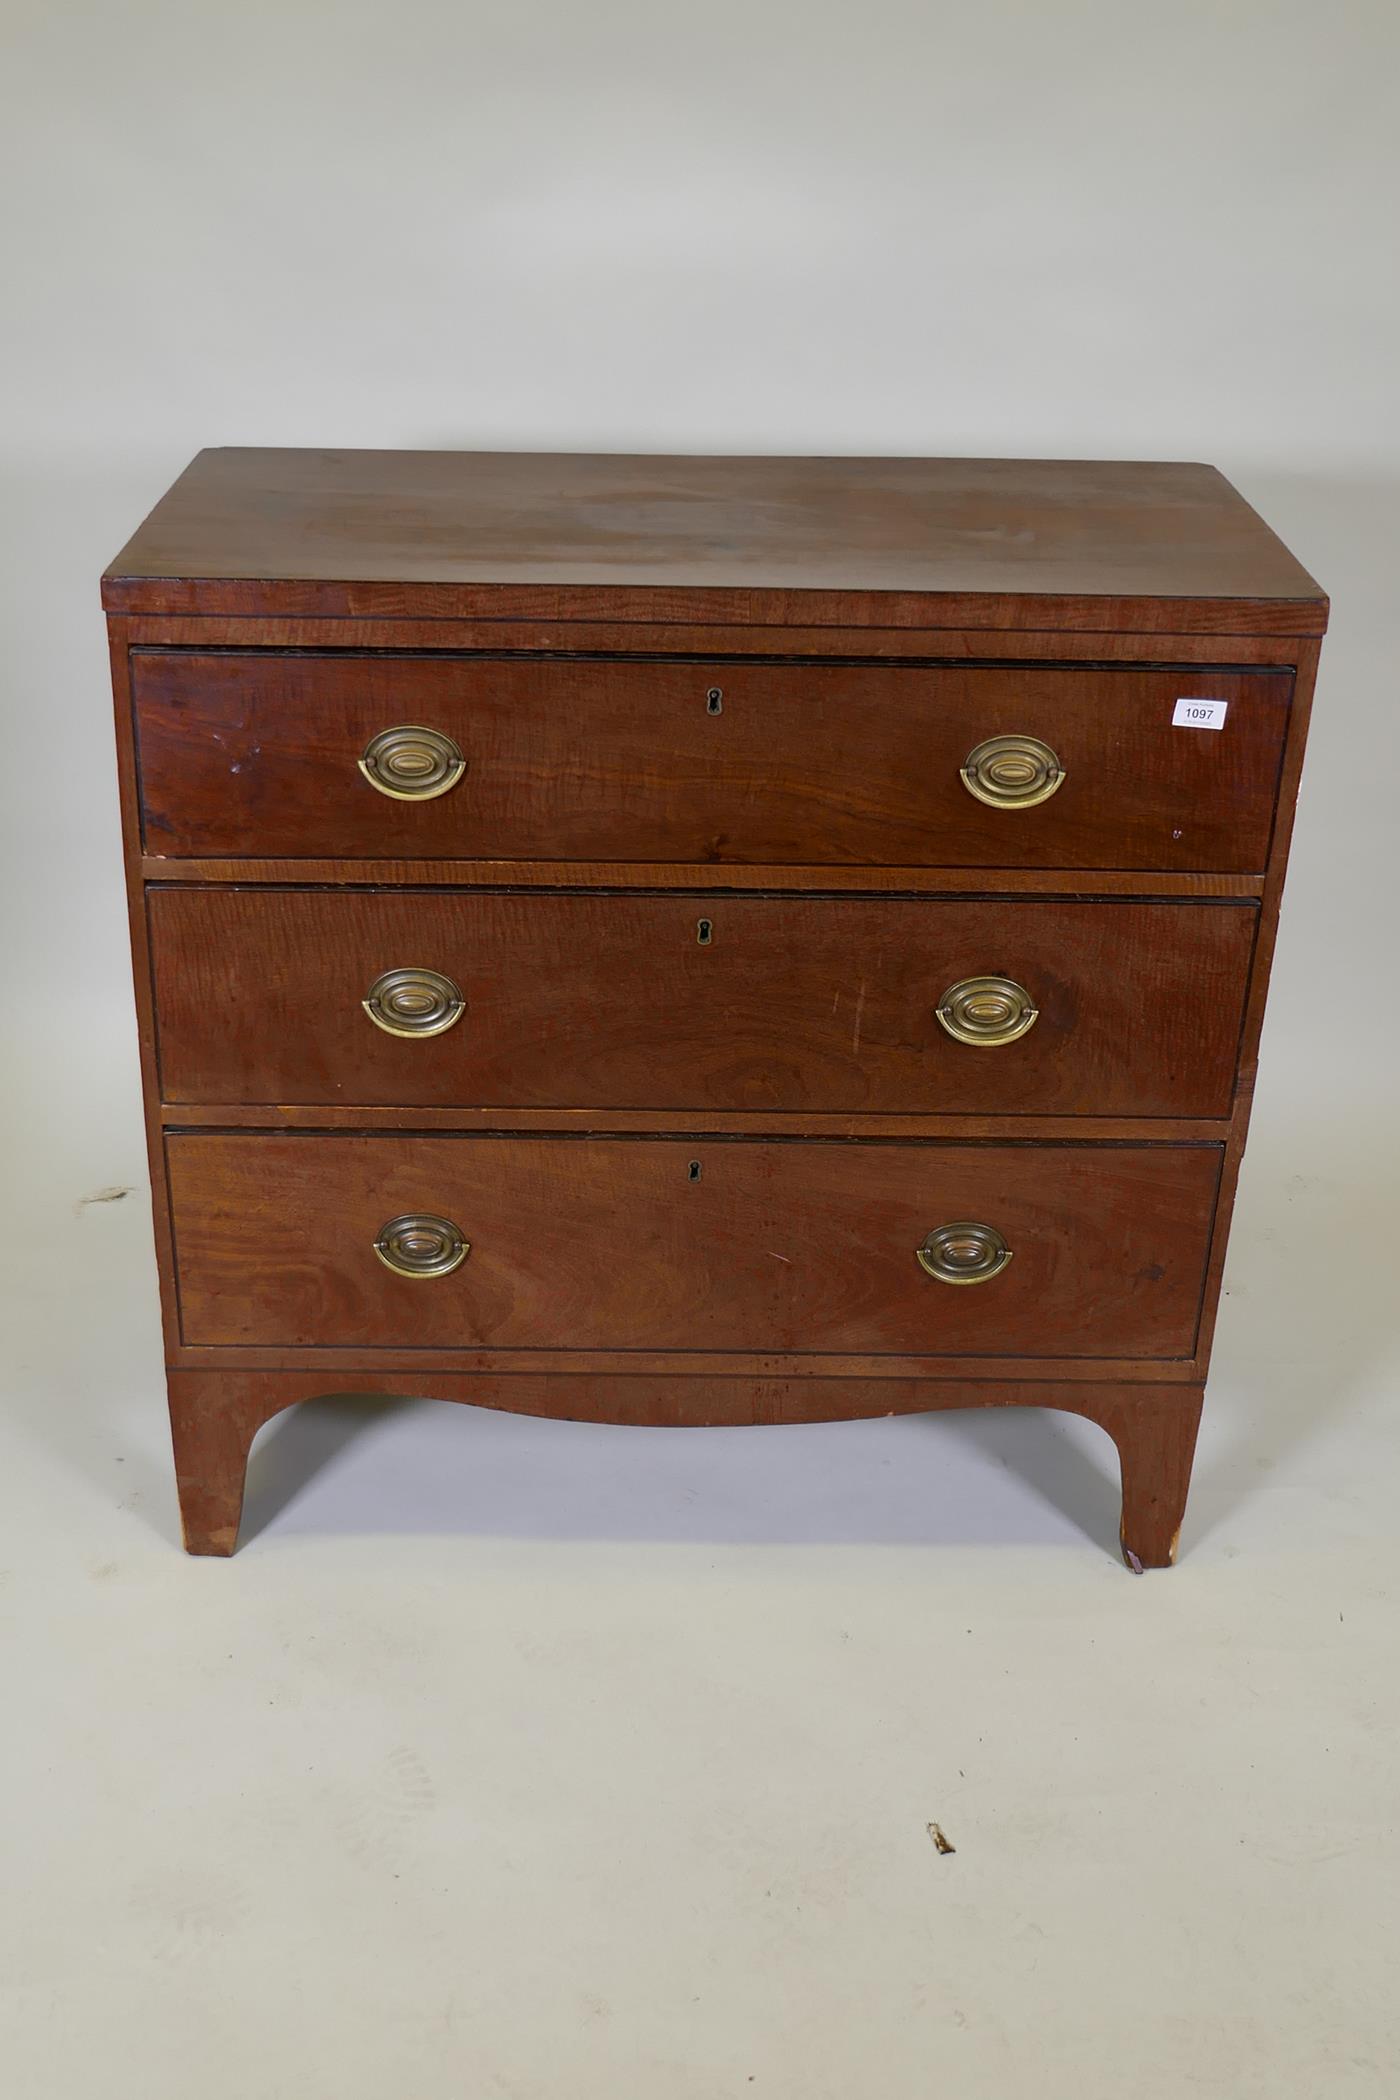 A Regency mahogany chest of three long drawers, caddy top and ebony inlaid decoration, pine - Image 2 of 6